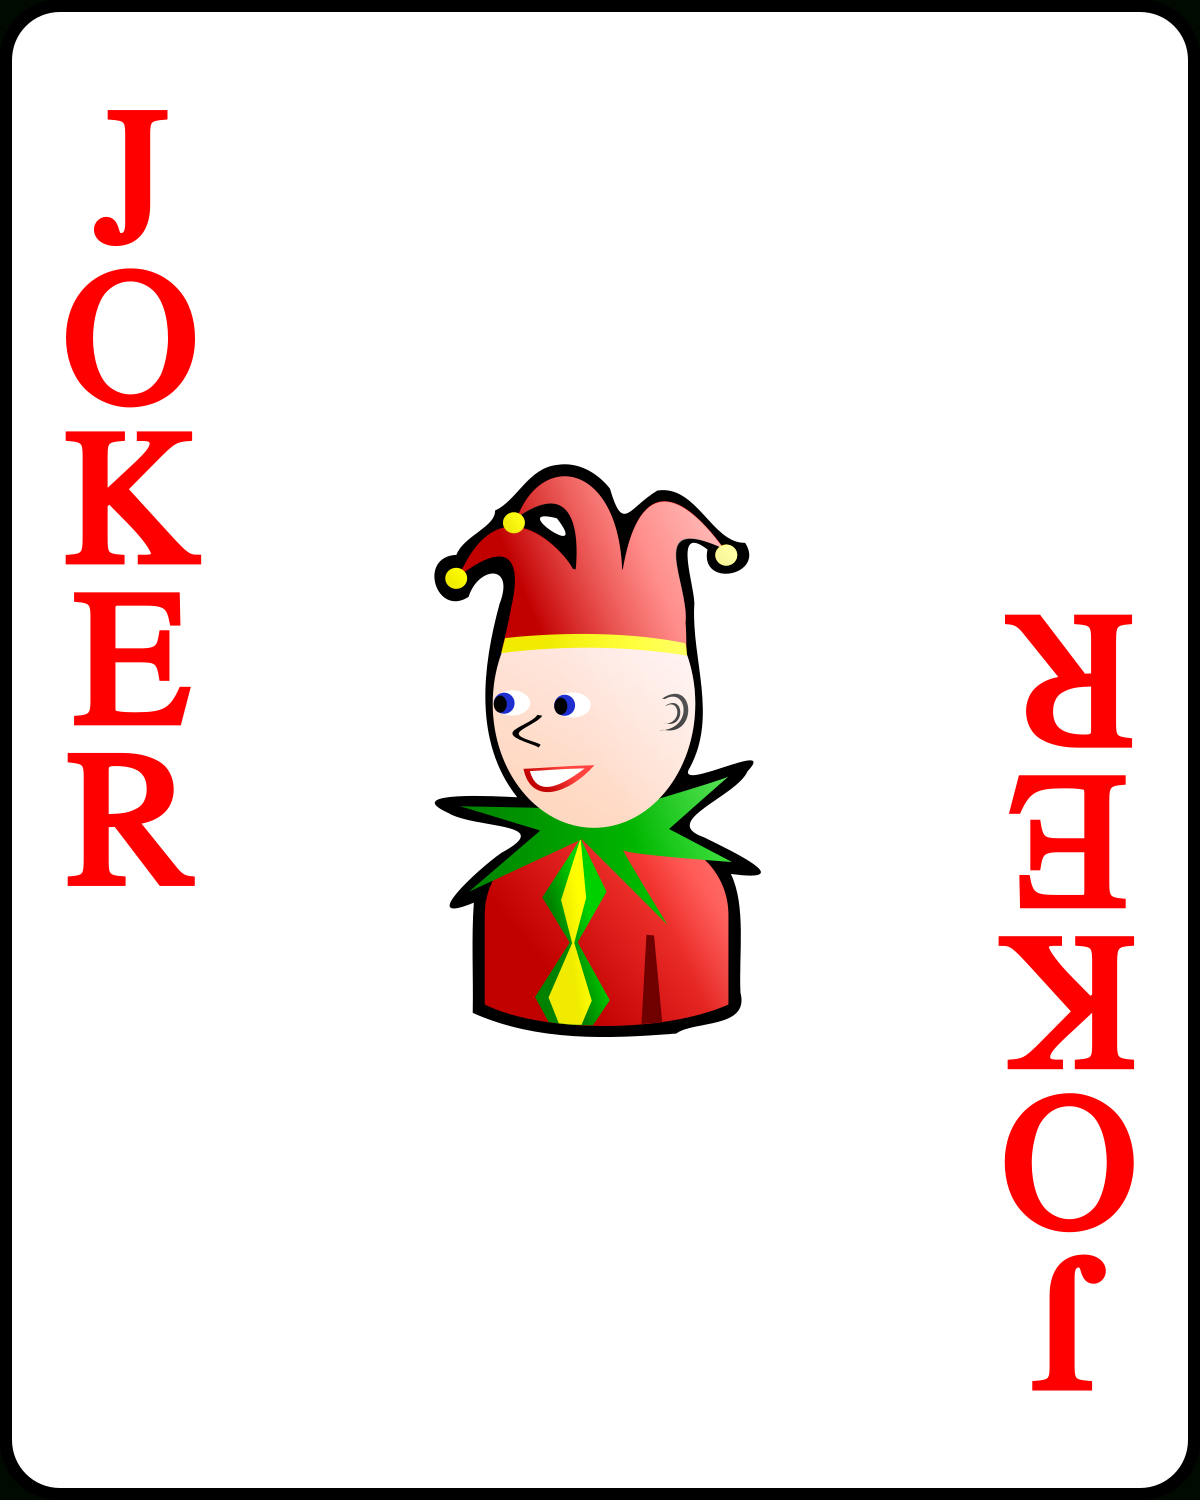 File:playing Card Red Joker.svg – Wikimedia Commons For Joker Card Template